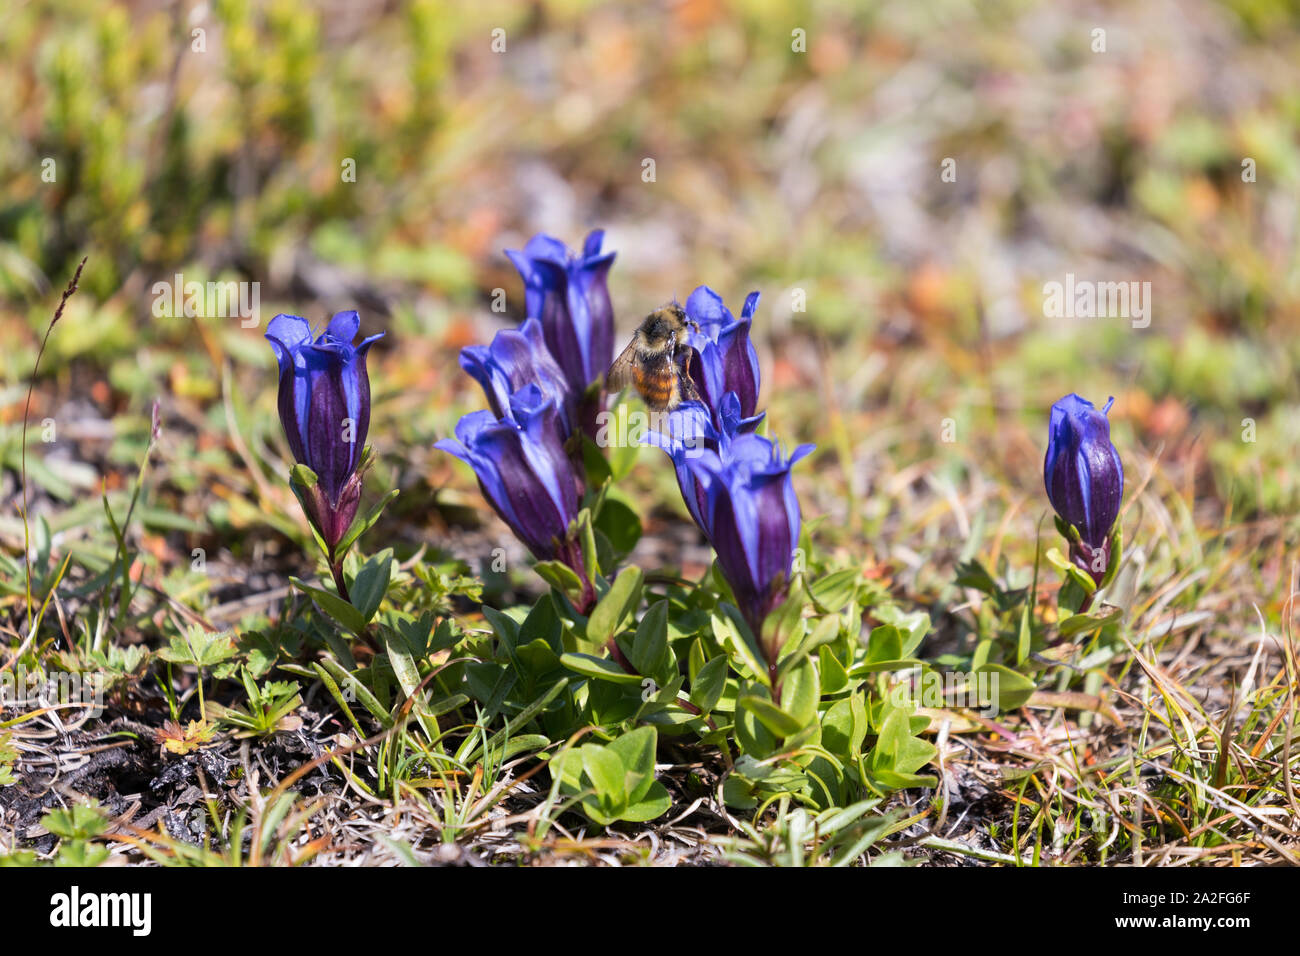 A group of Mountain Bog Gentian flowers with a honeybee pollenizing them in Mt. Rainier National Park in Washington state Stock Photo